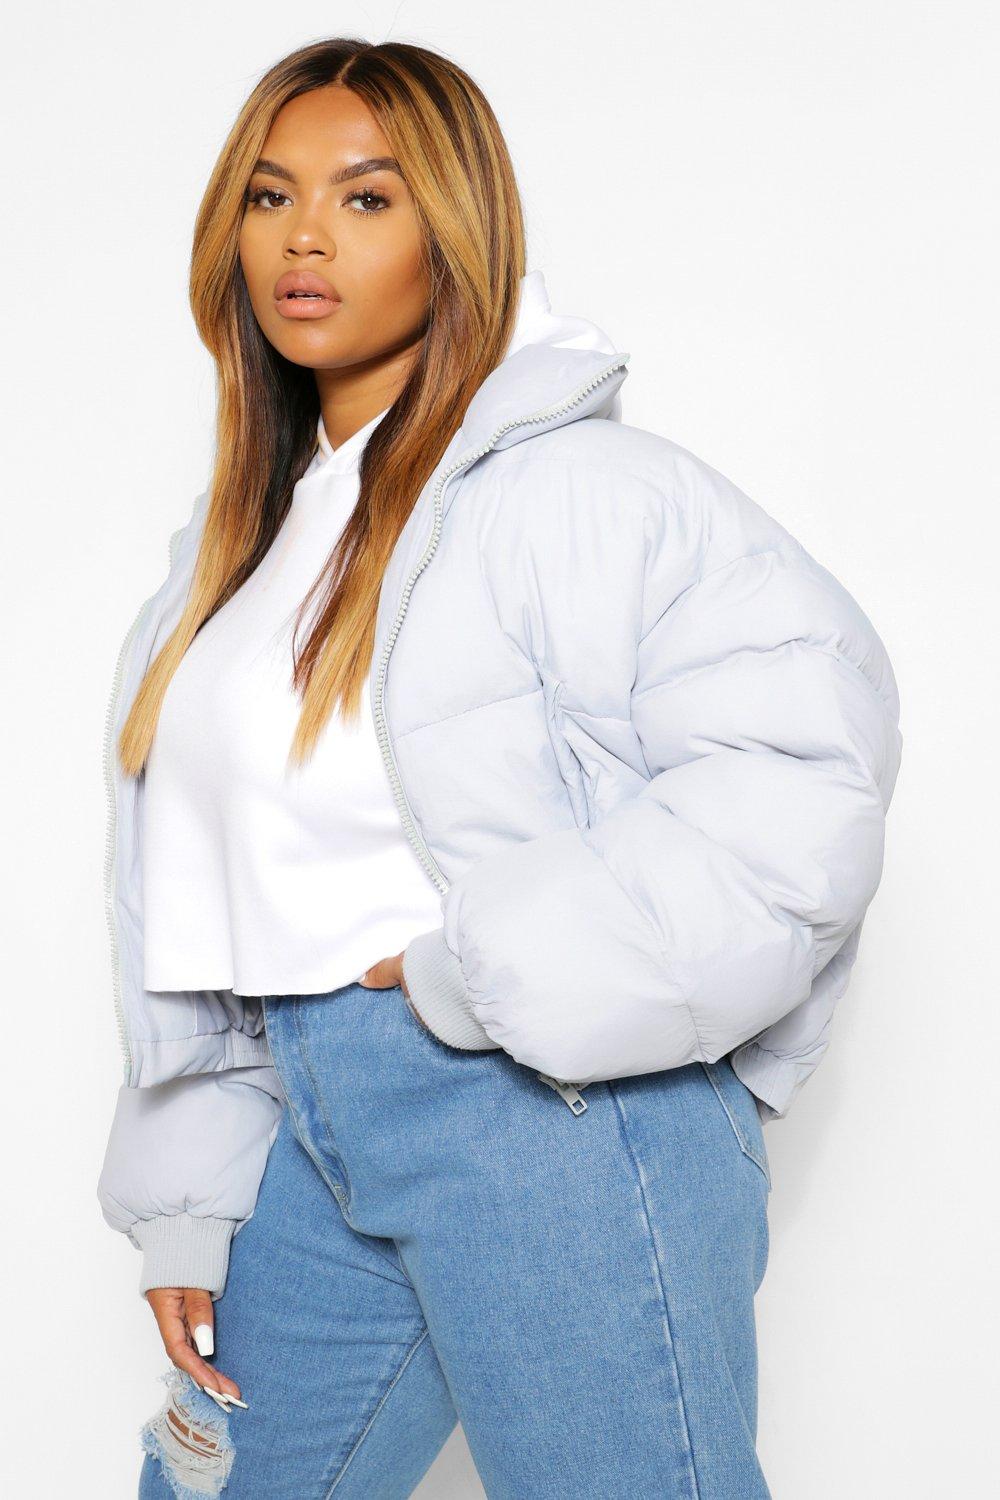 Funnel Neck Cropped Puffer Jacket